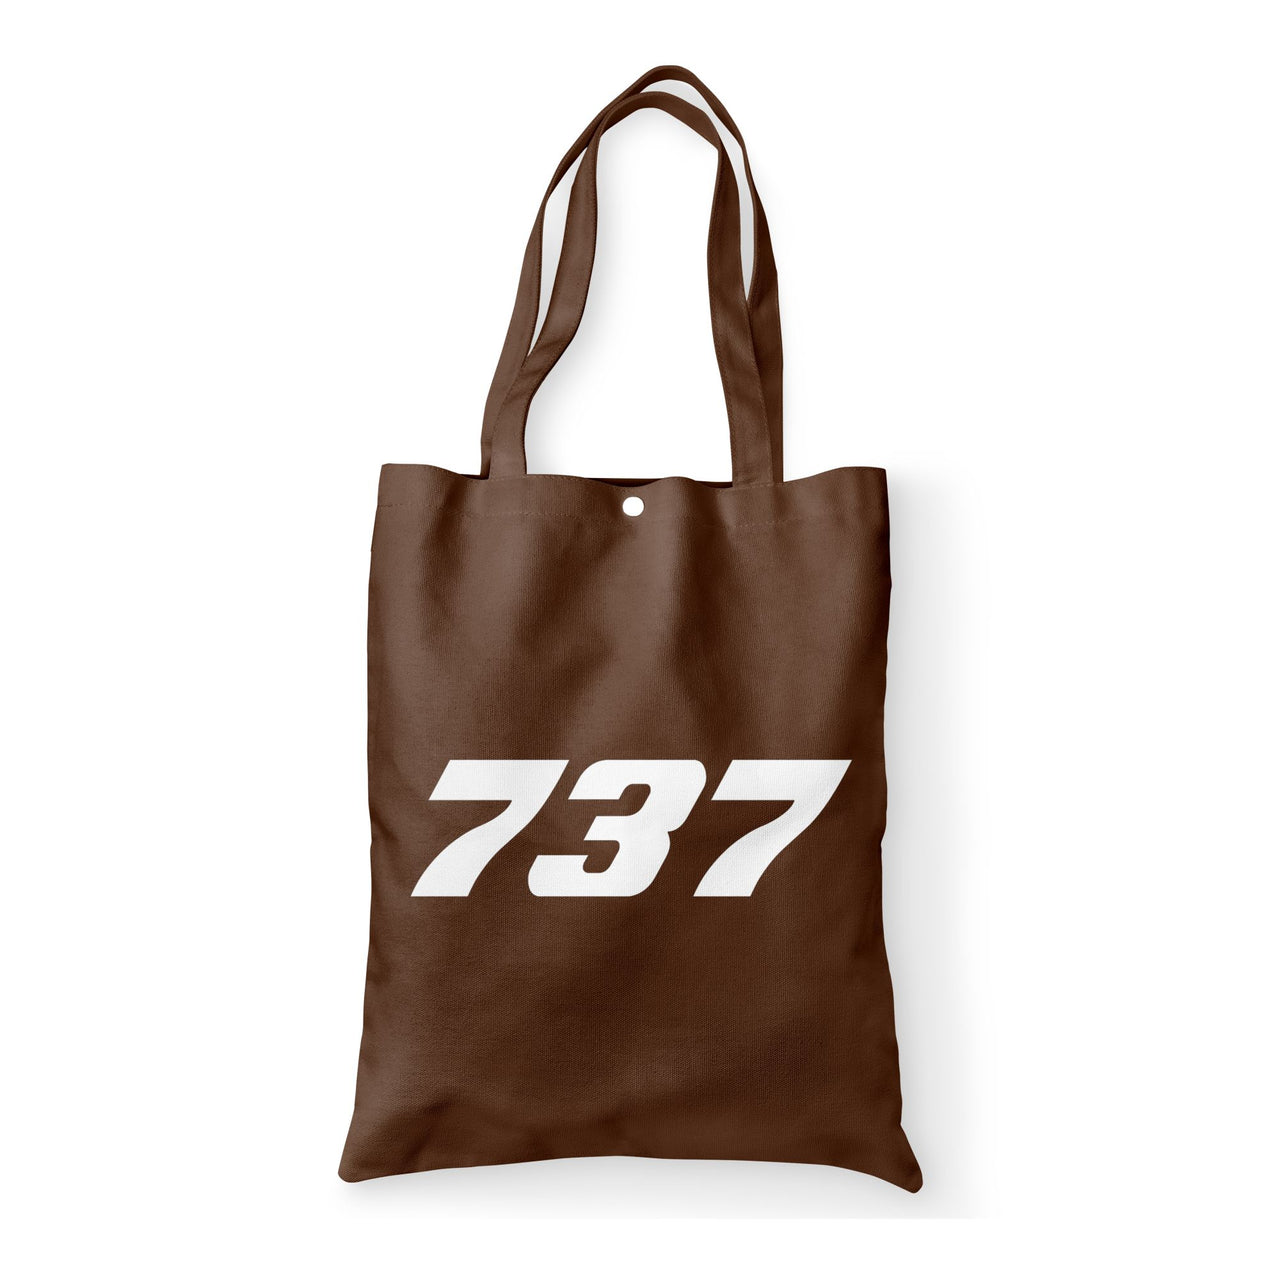 737 Flat Text Designed Tote Bags